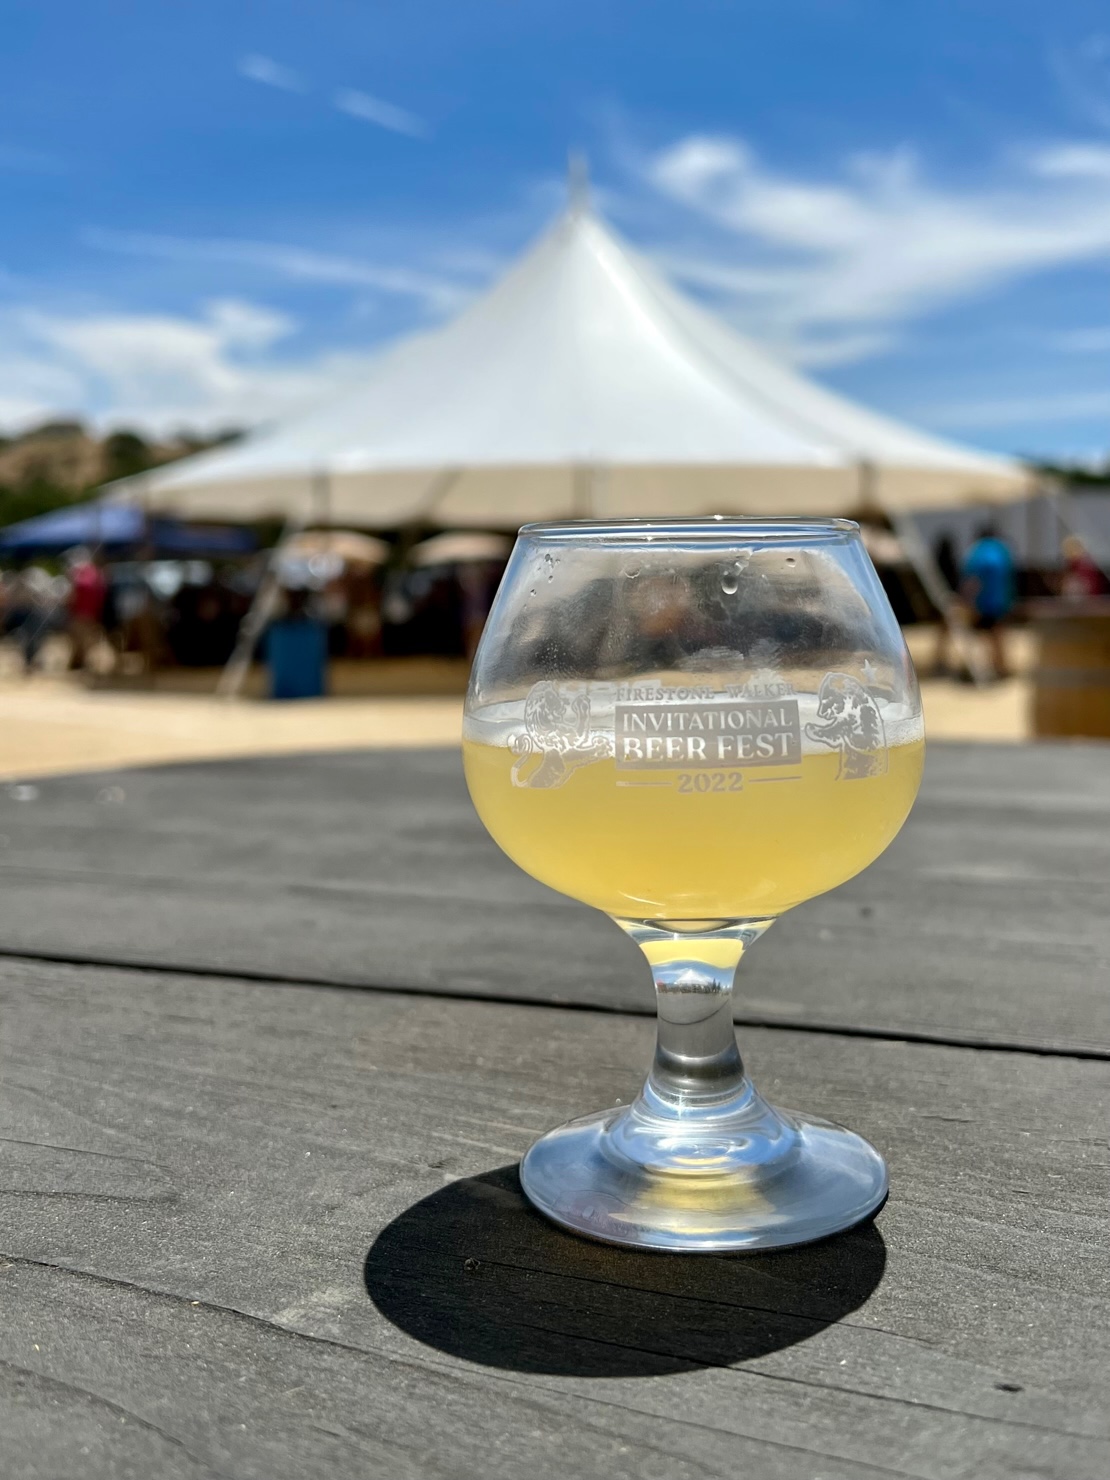 Once again a crowd favorite at the 2022 Firestone Walker Invitational Beer Fest were the beers from Side Project Brewing.